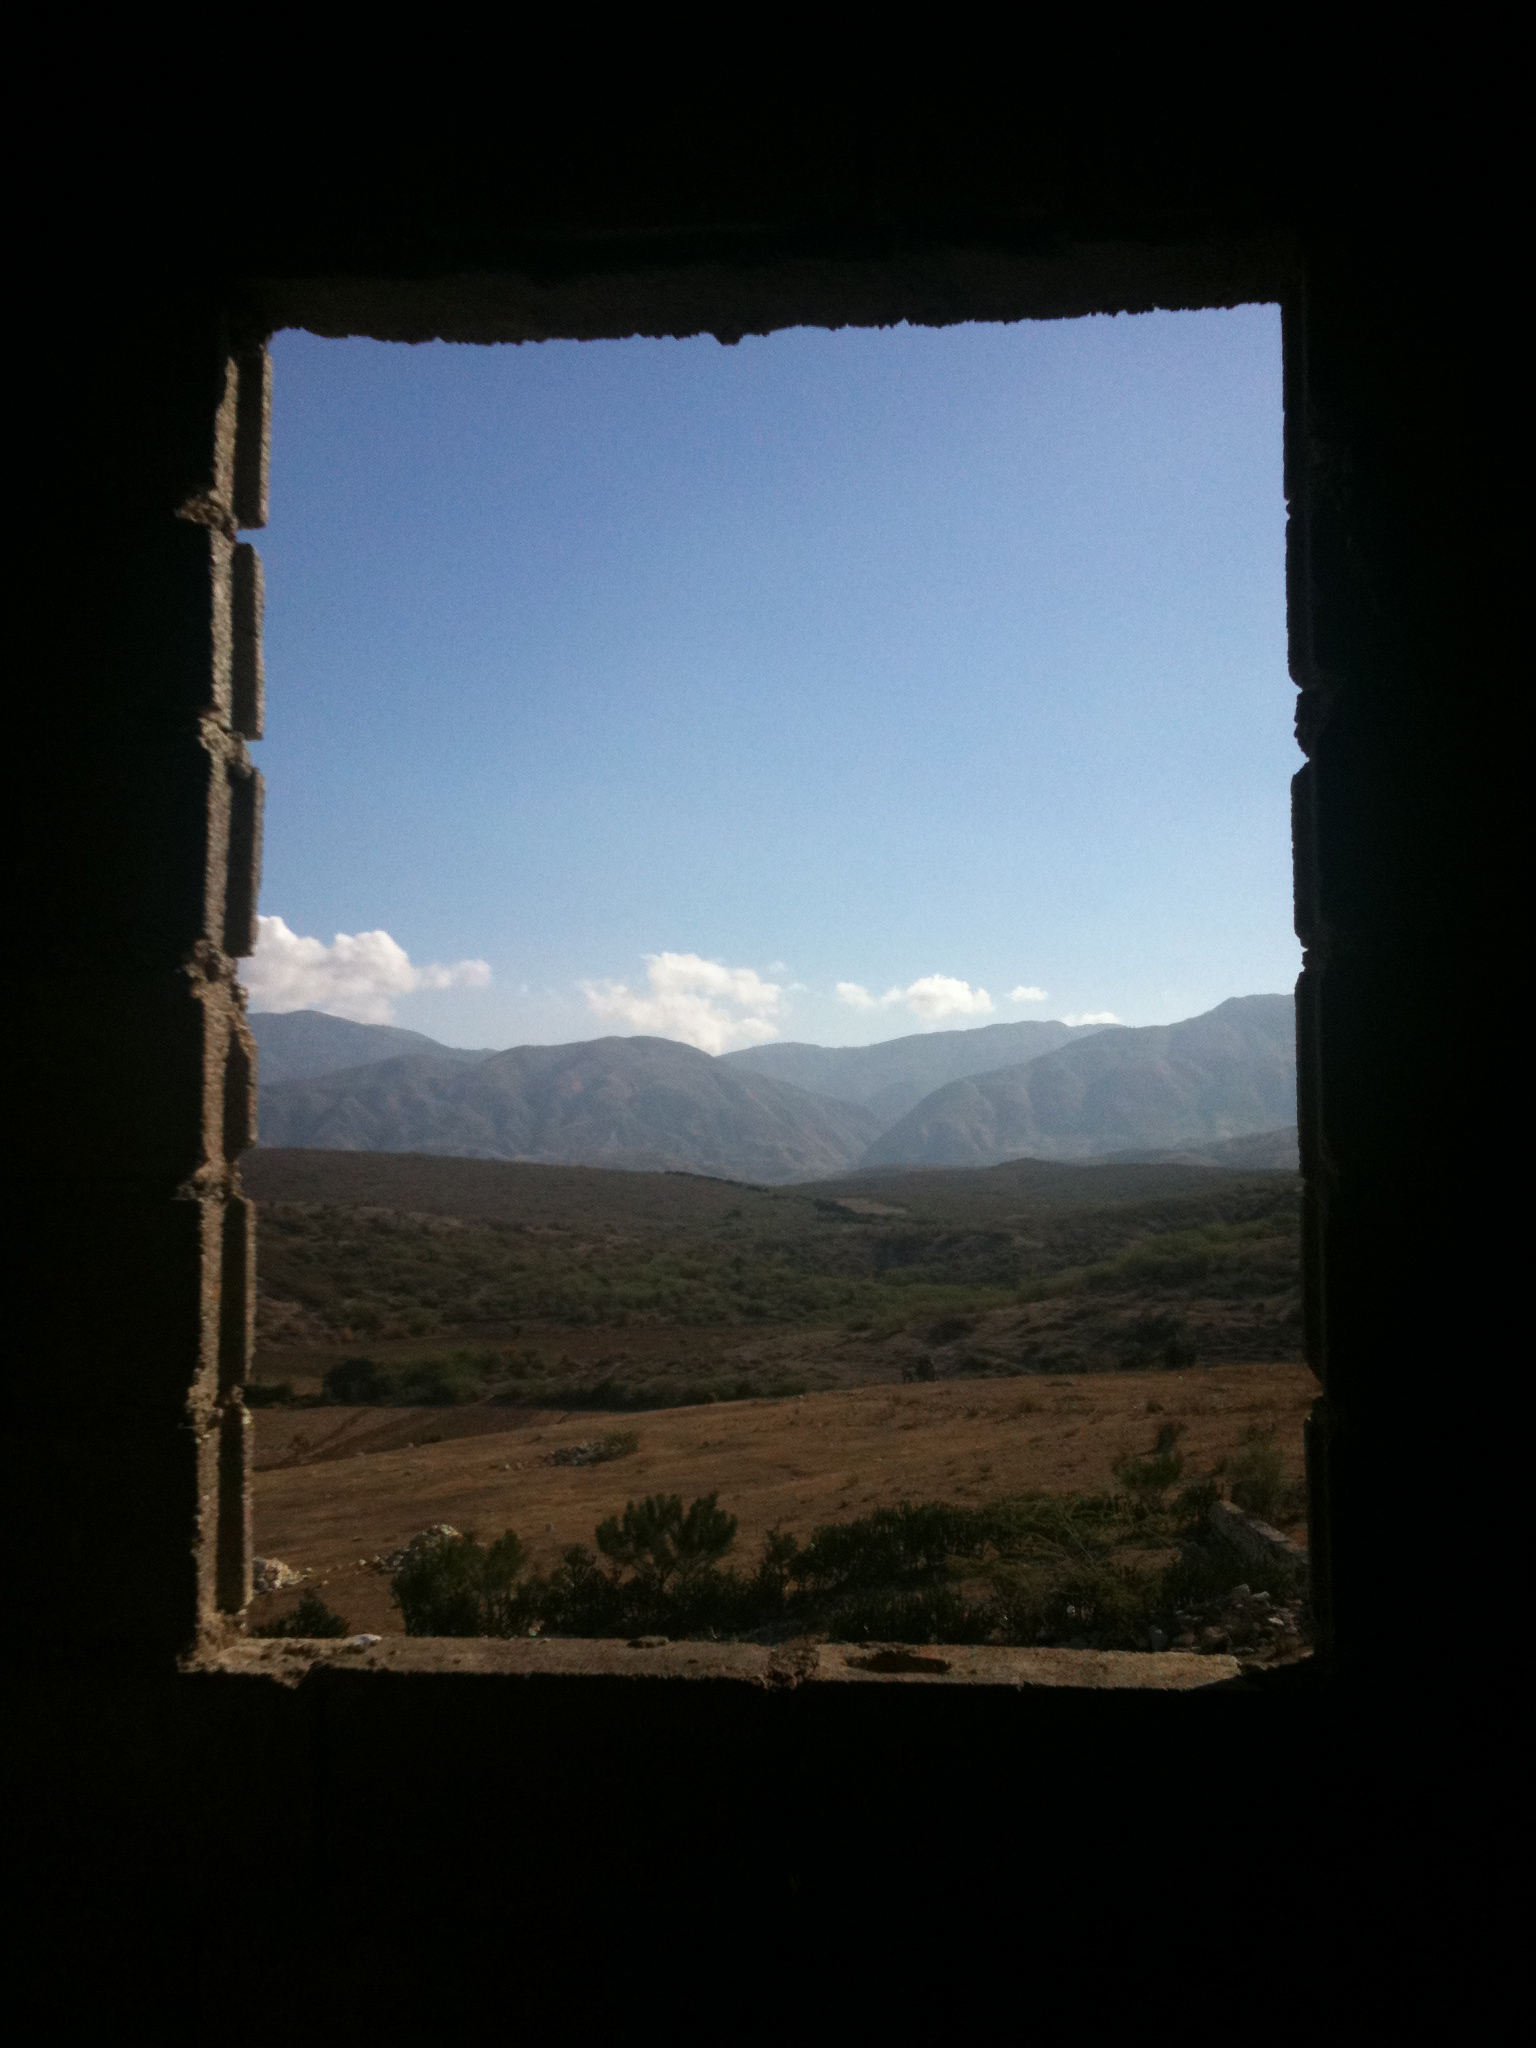  From the house where I stayed in Kabaré (Cabaret) -- just north of Port-au-Prince, April 2011. 